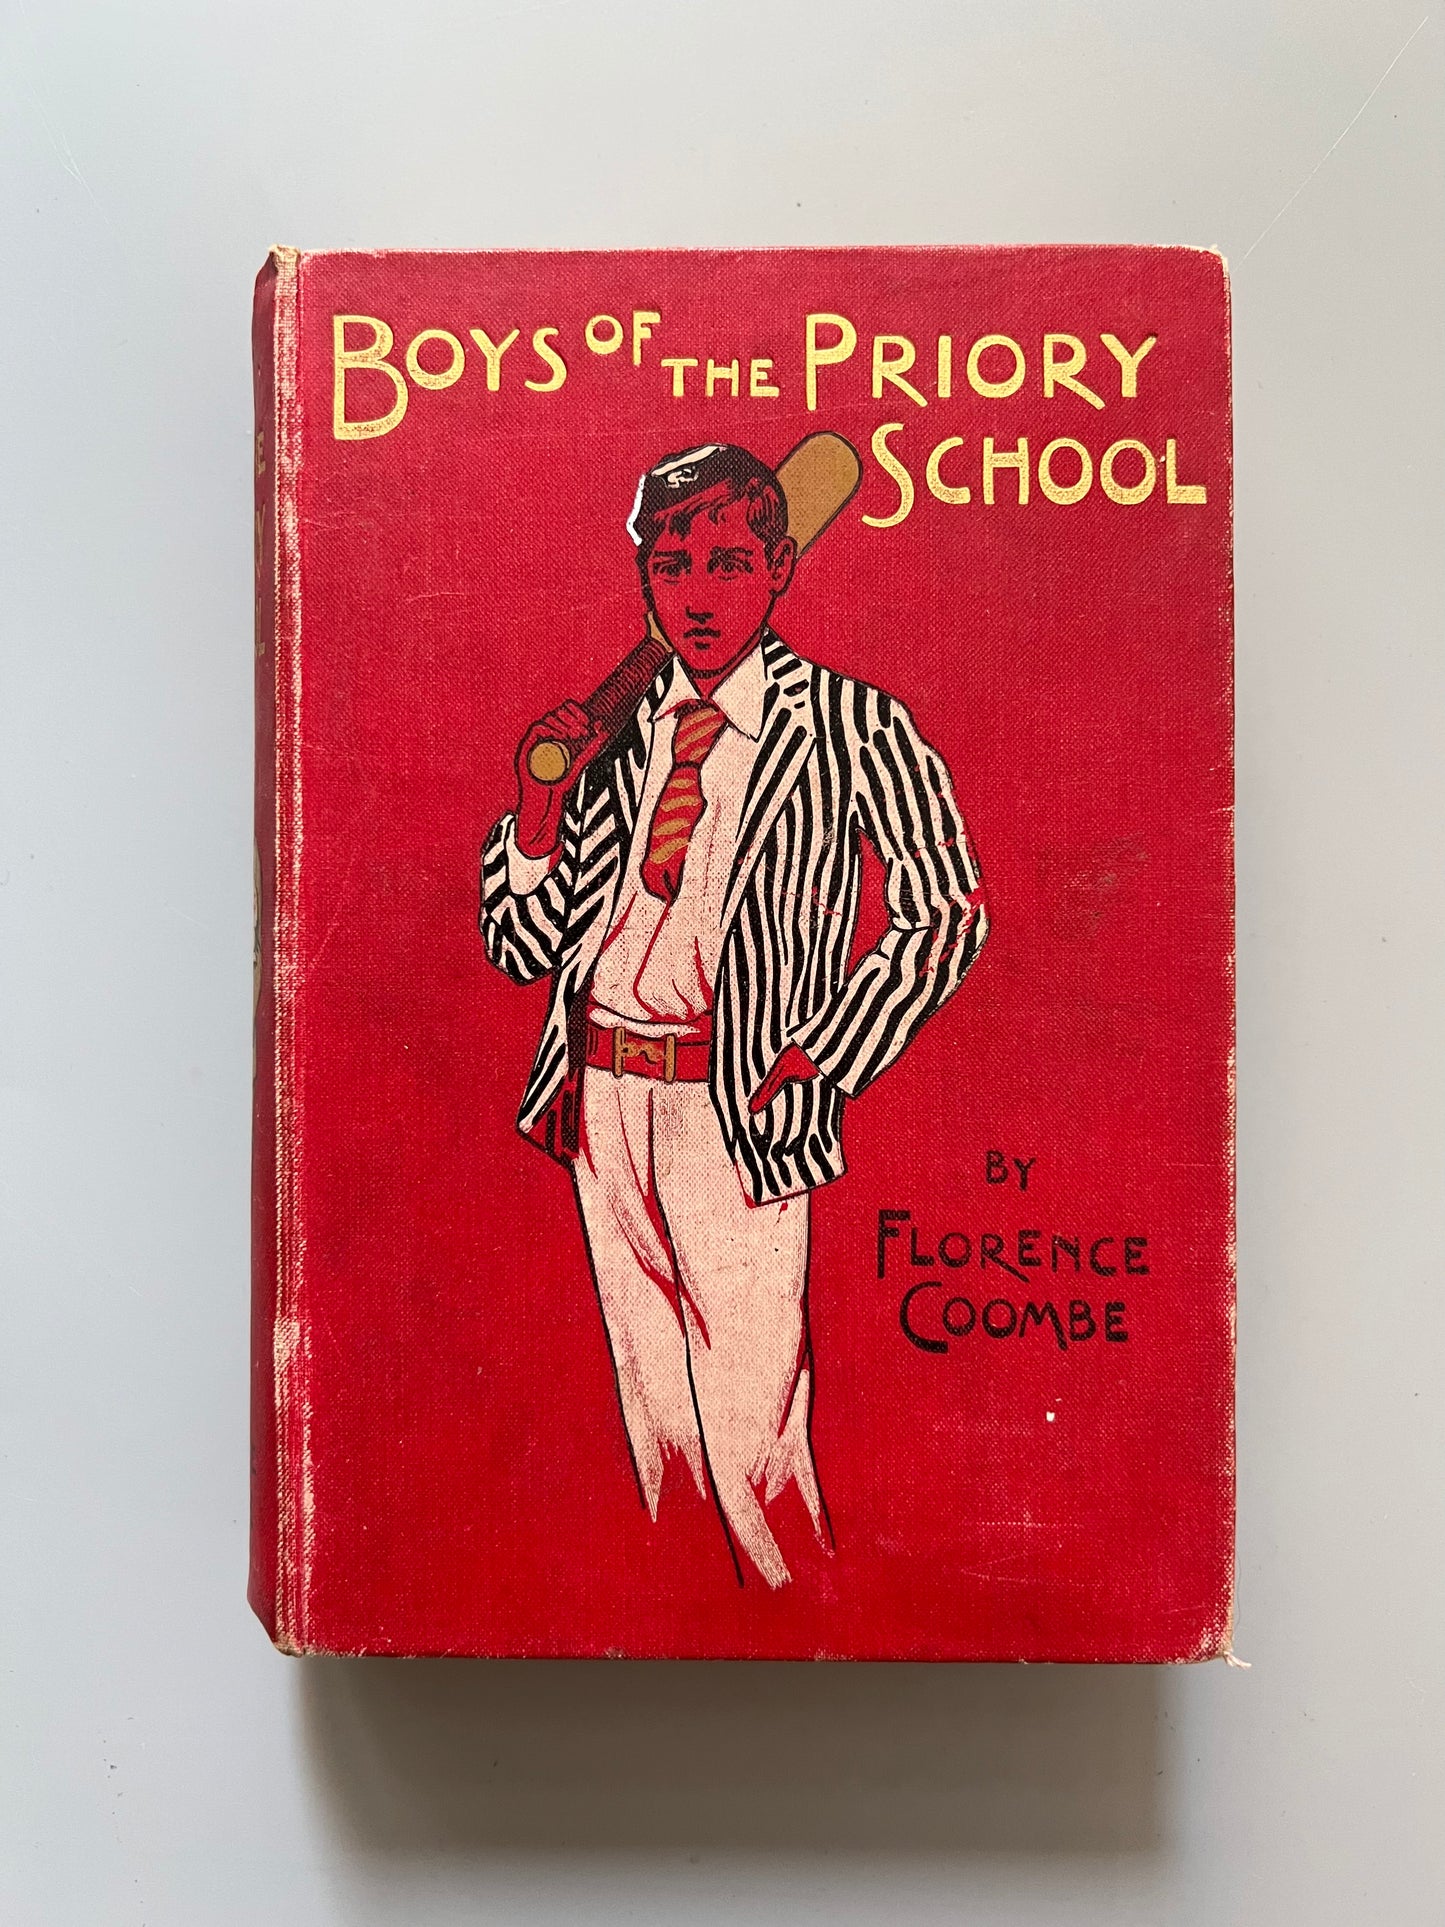 Boys of the priory school, Florence Coombe - Blackie and Son, ca. 1910